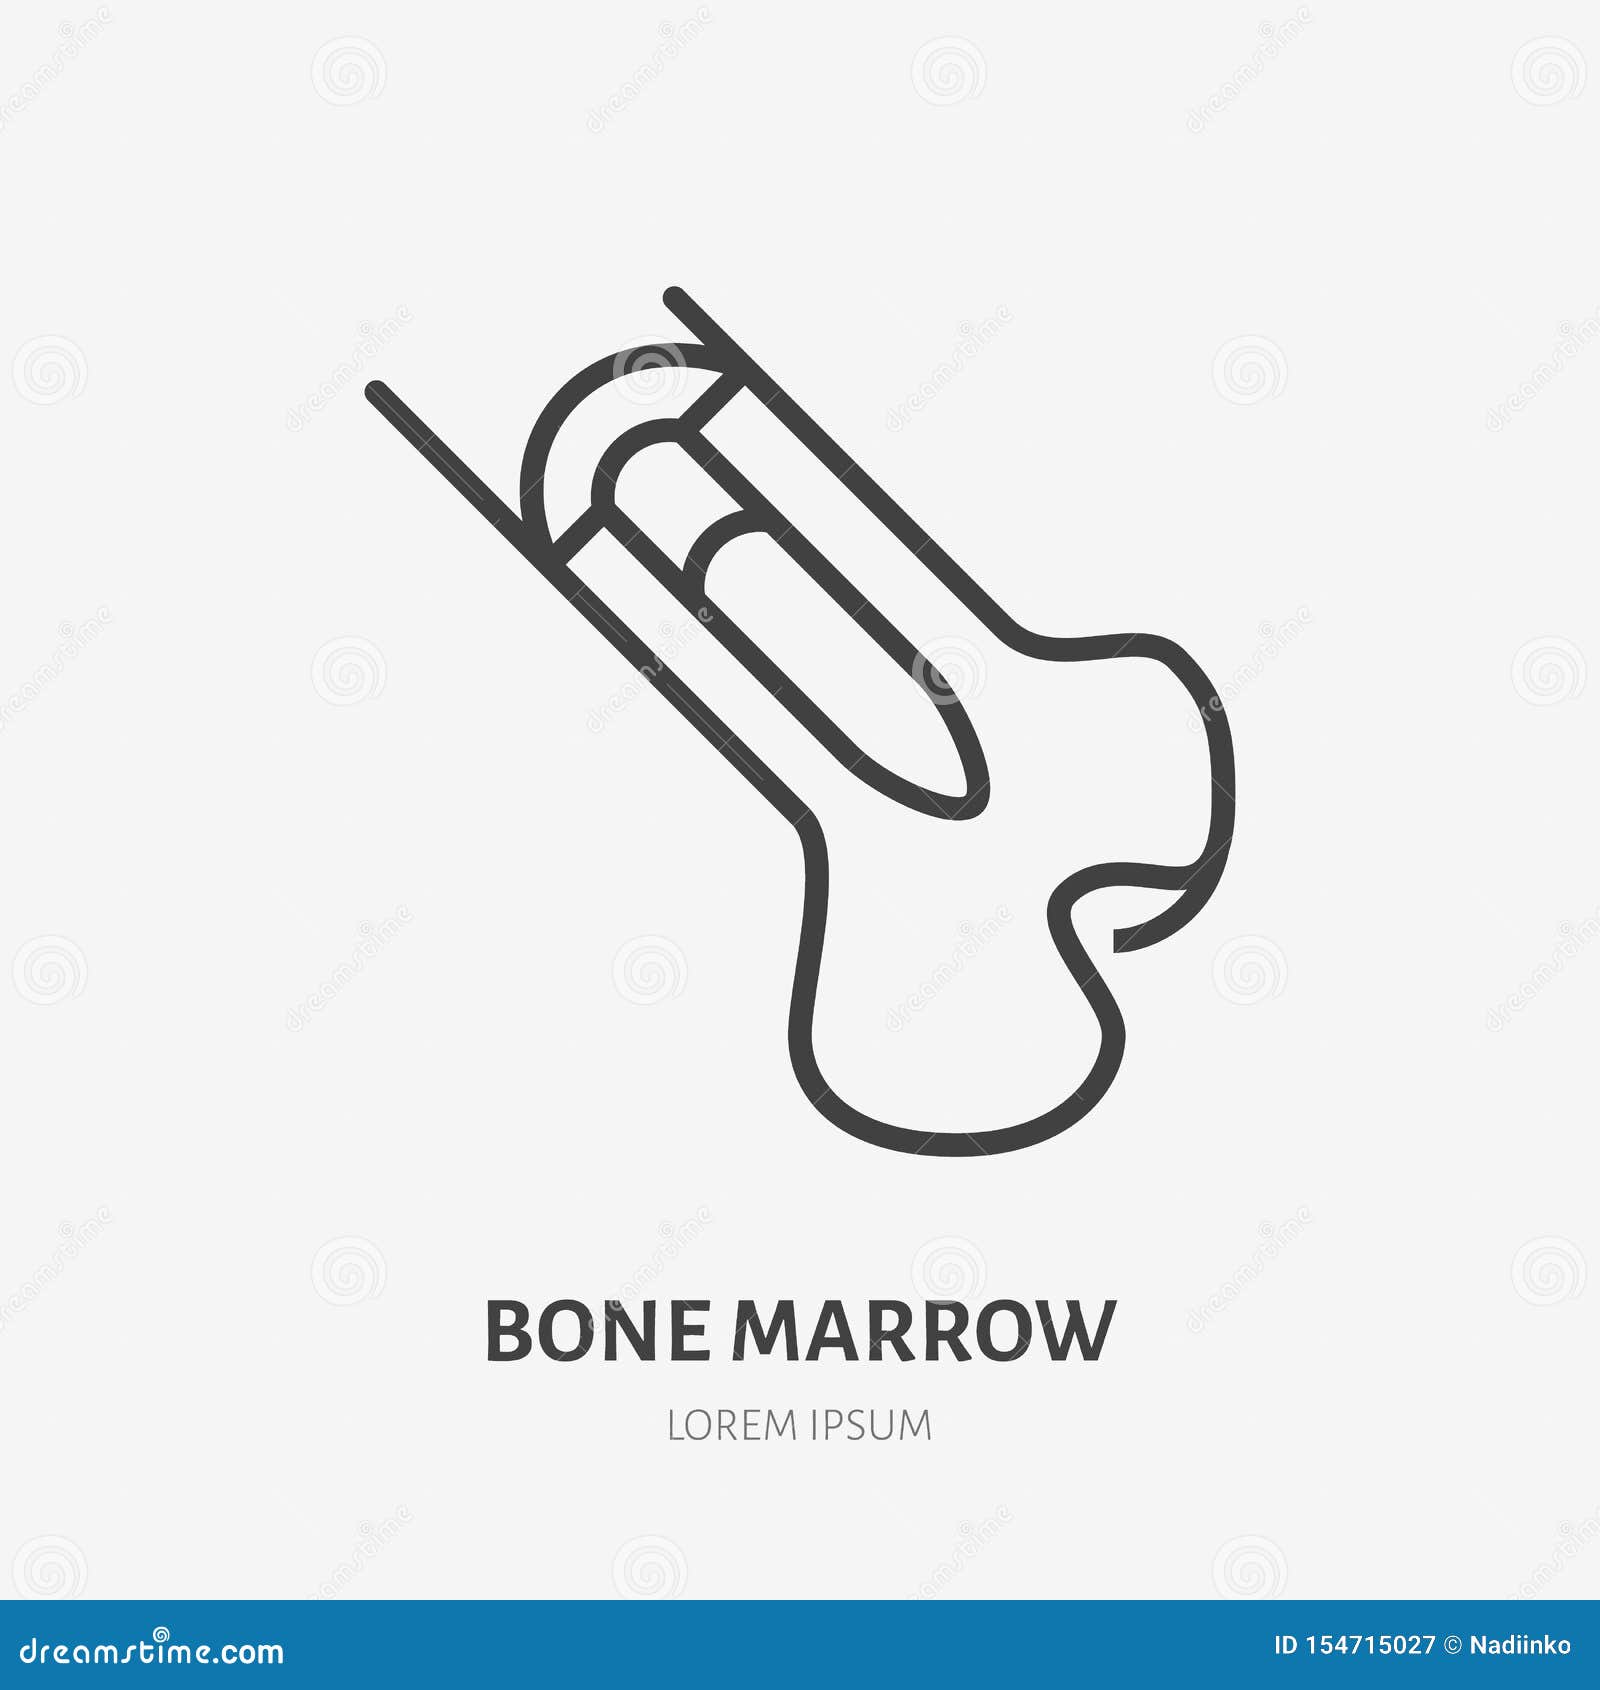 bone marrow flat line icon.  thin pictogram of human skeleton structure, outline  for orthopedic